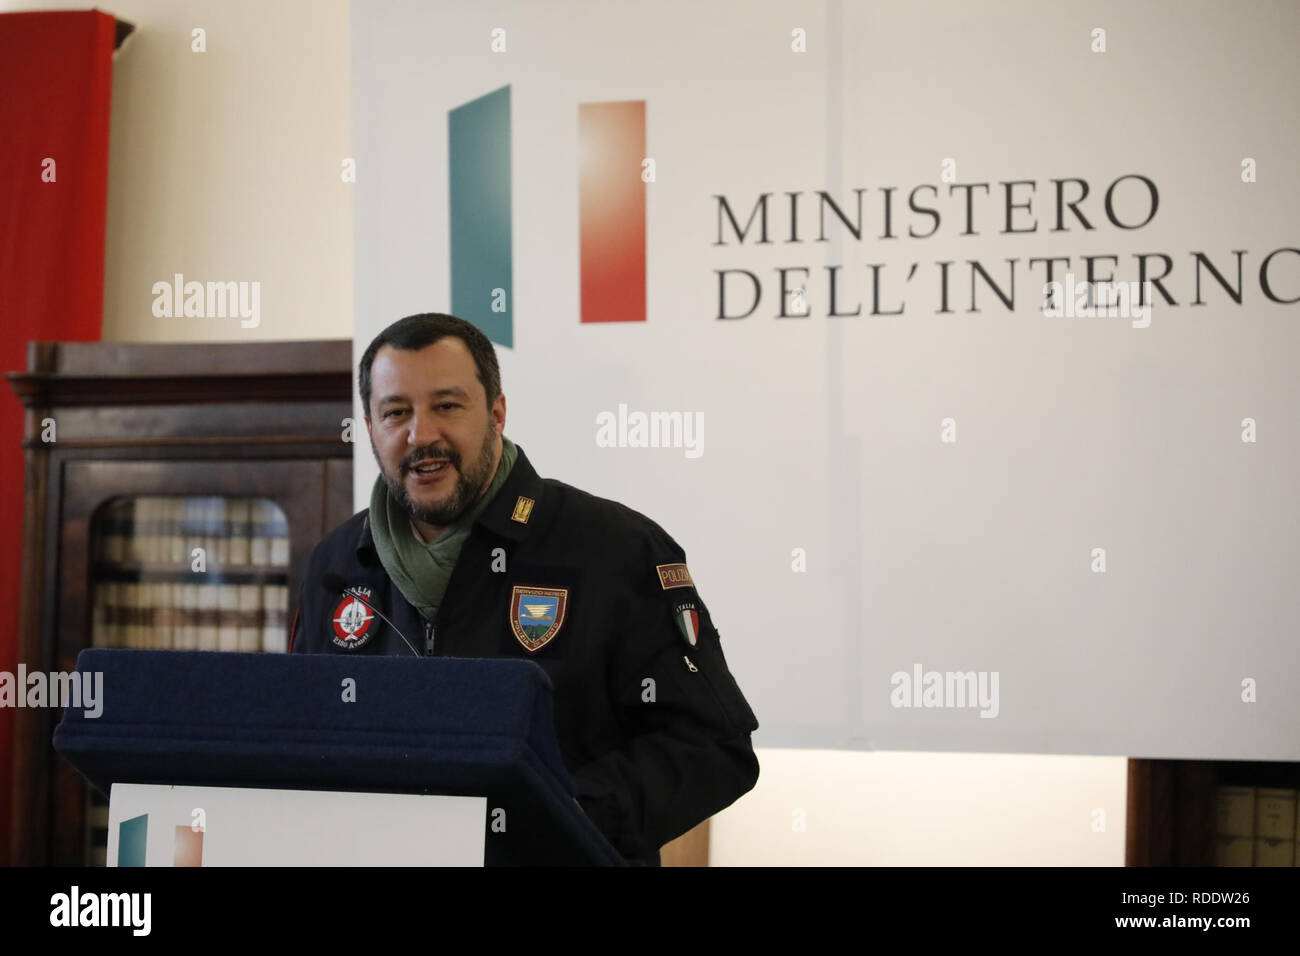 Italy. 18th Jan, 2019. January 18, 2019 - Afragola (Na) the Italian Interior Minister Matteo Salvini arrives in the province of Naples to give his reassurance on security given the latest incidents of extortion against tradesci as the pizza maker Gino Sorbillo to whom a bomb was put to intimidate him.in photo: Minister Matteo Salvini Credit: Fabio Sasso/ZUMA Wire/Alamy Live News Stock Photo